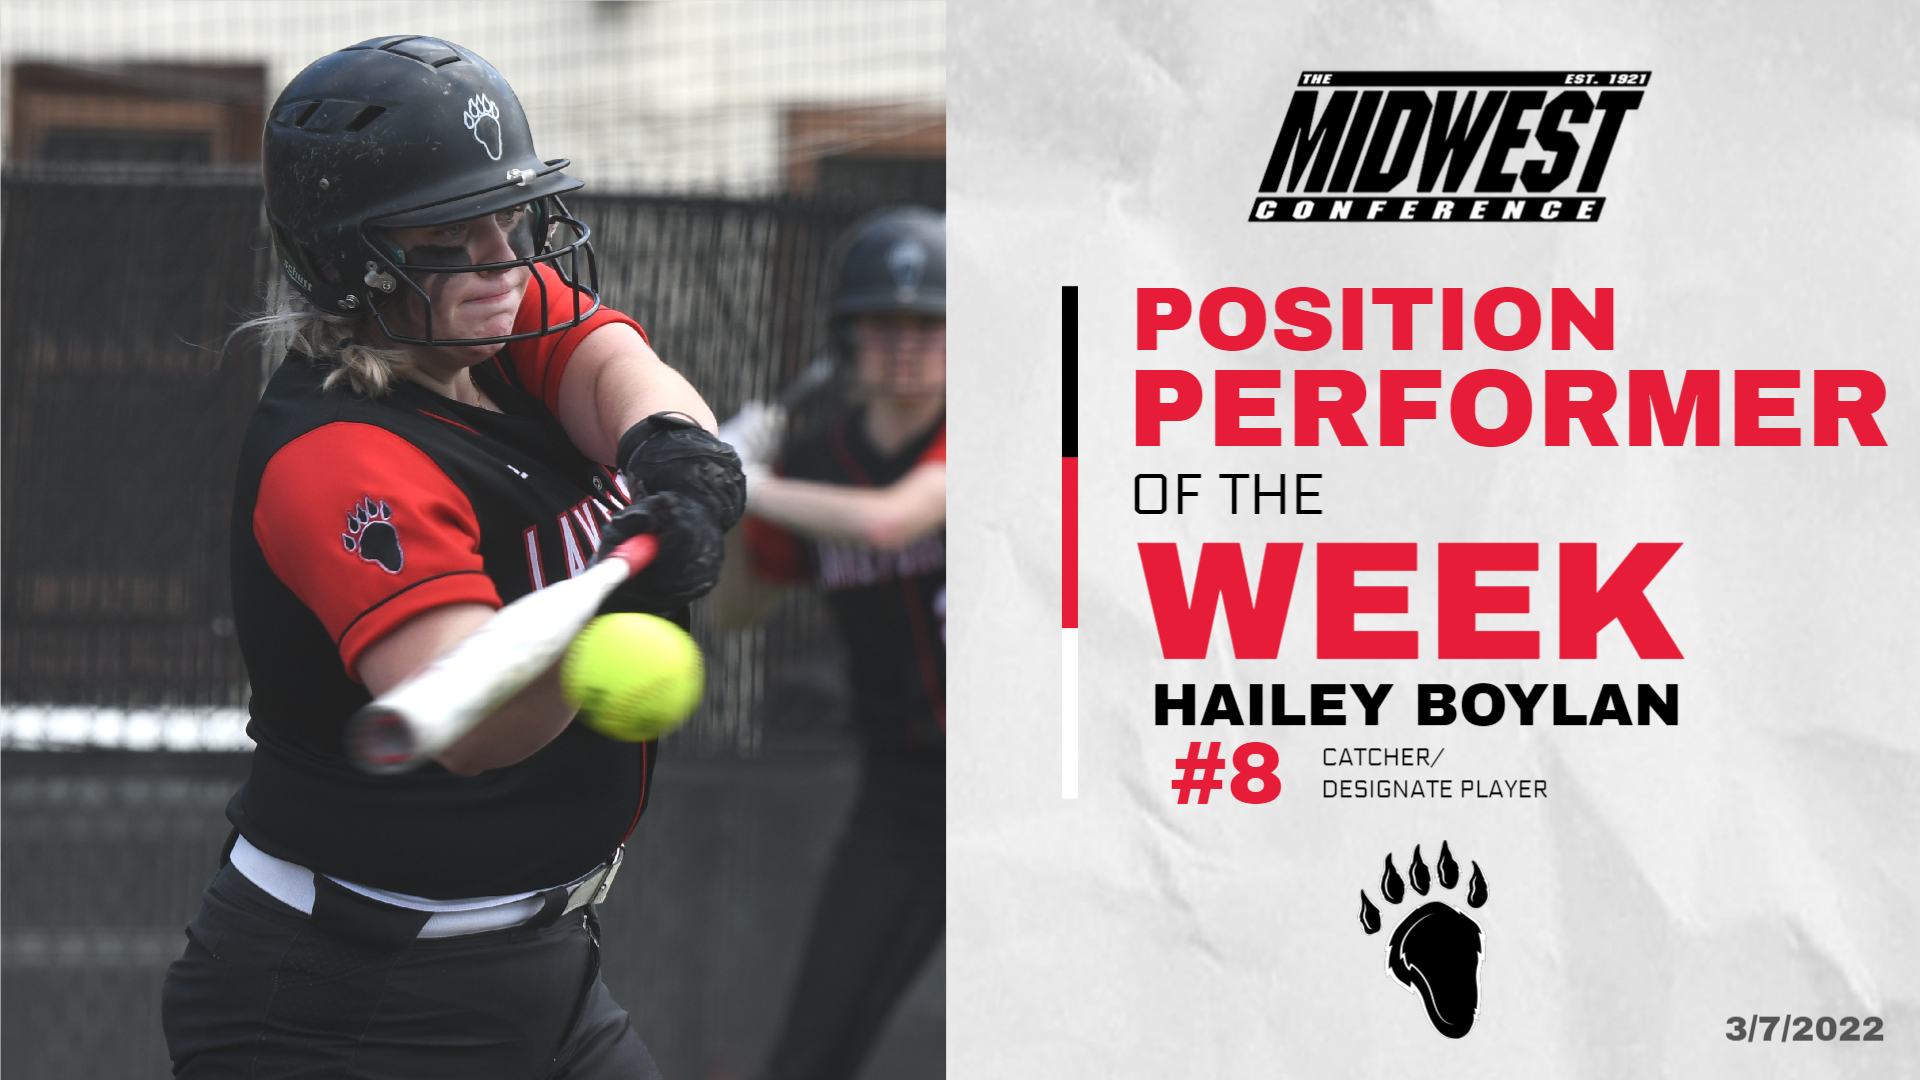 Hailey Boylan Named MWC Position Performer of the Week